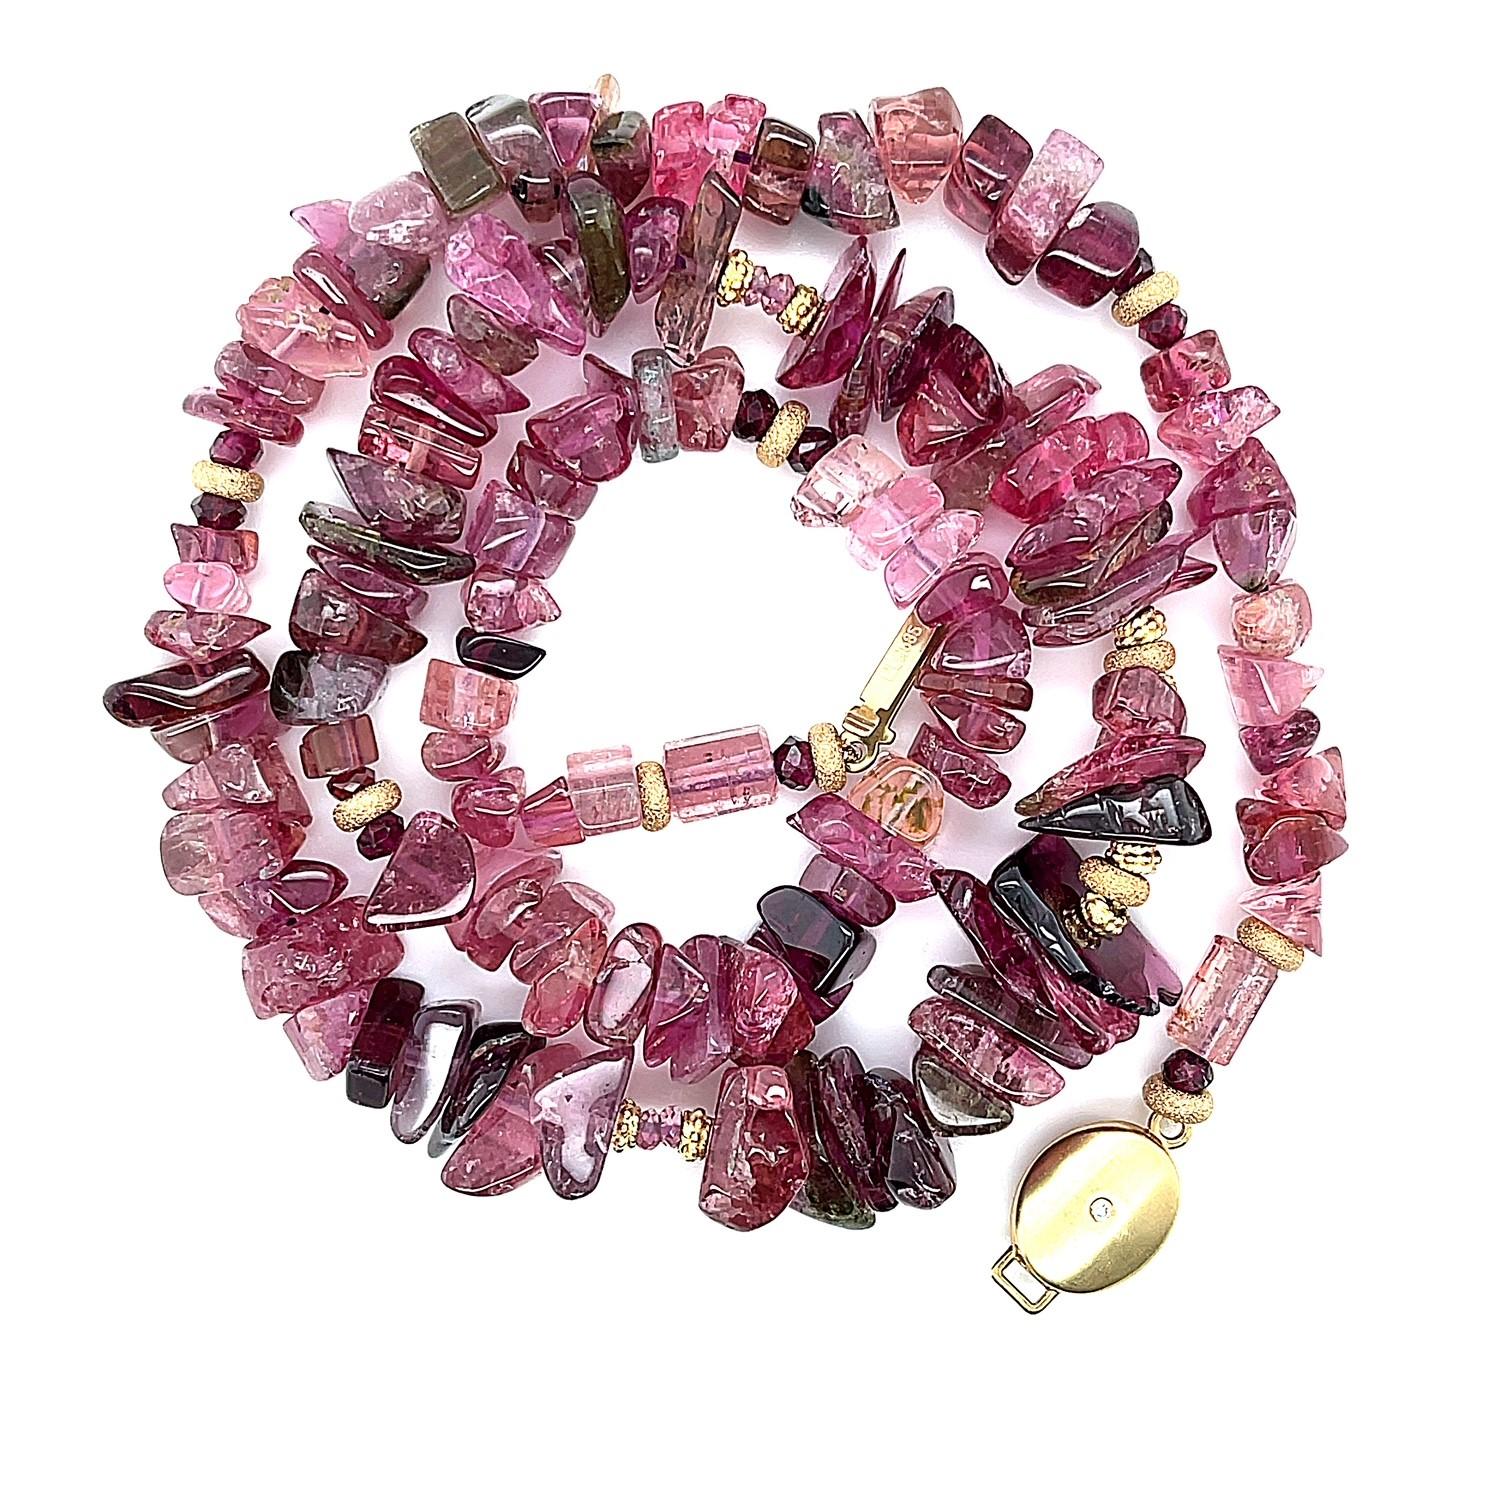 Red Tourmaline Beaded Necklace with Yellow Gold Accents, 254 Carats Total   1